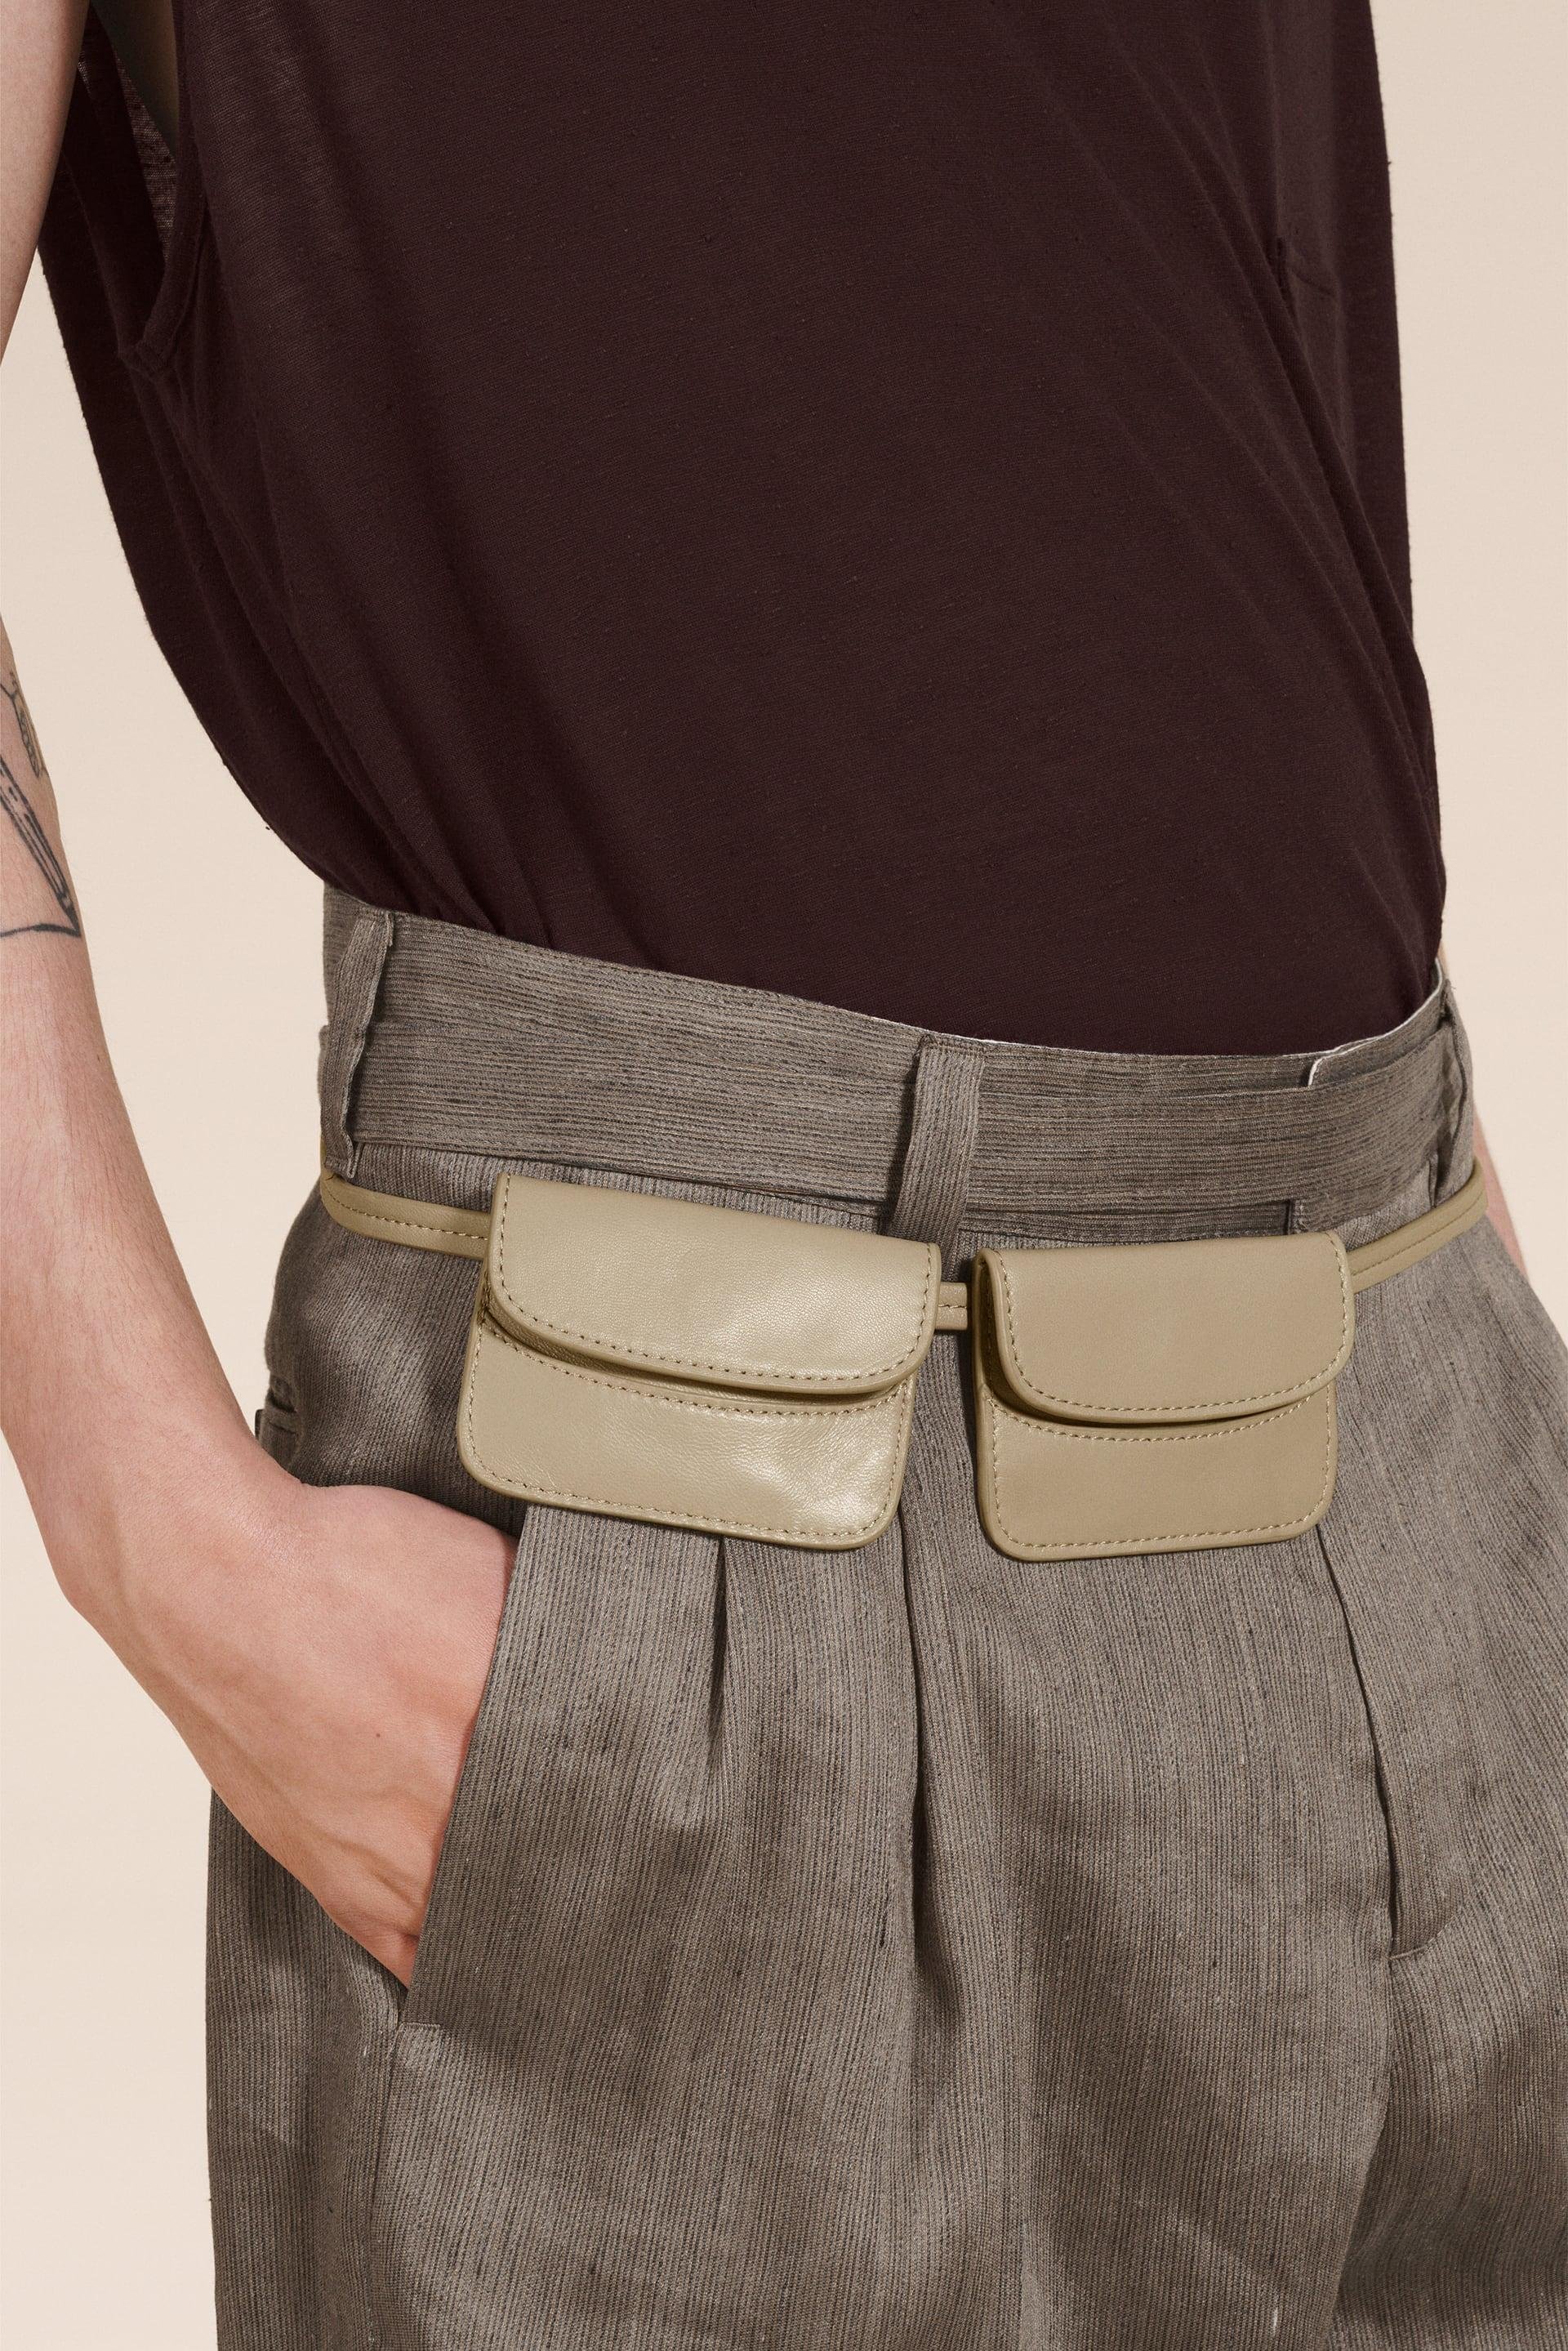 LEATHER BELT WITH POCKETS LIMITED EDITION by ZARA